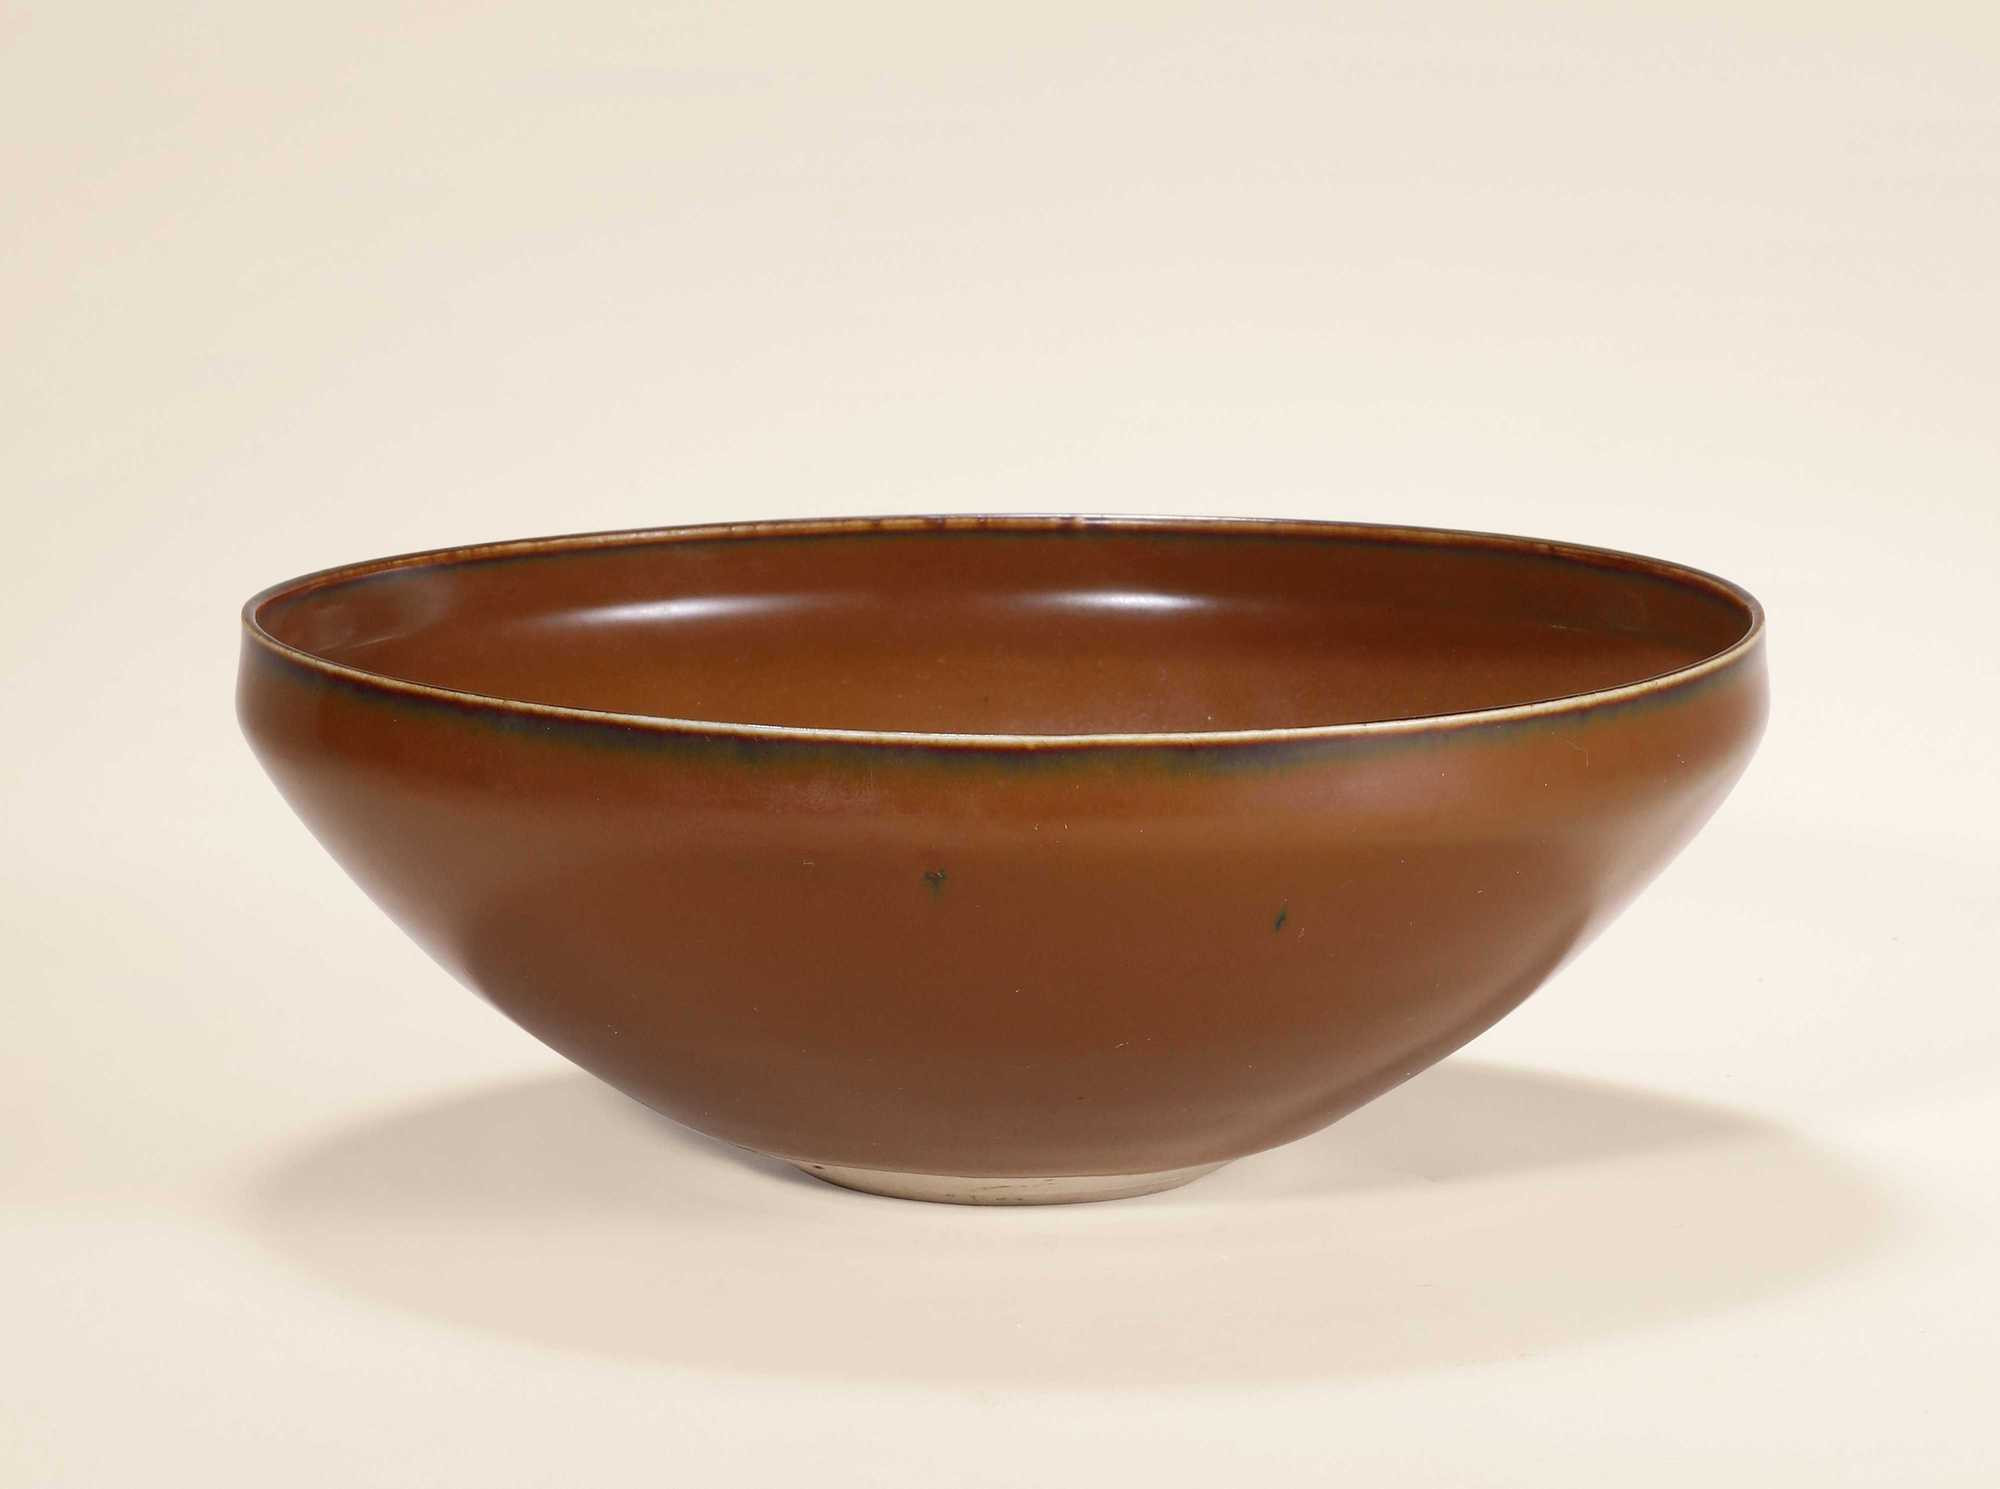 A DING WARE PERSIMMON-GLAZED BOWL,BO